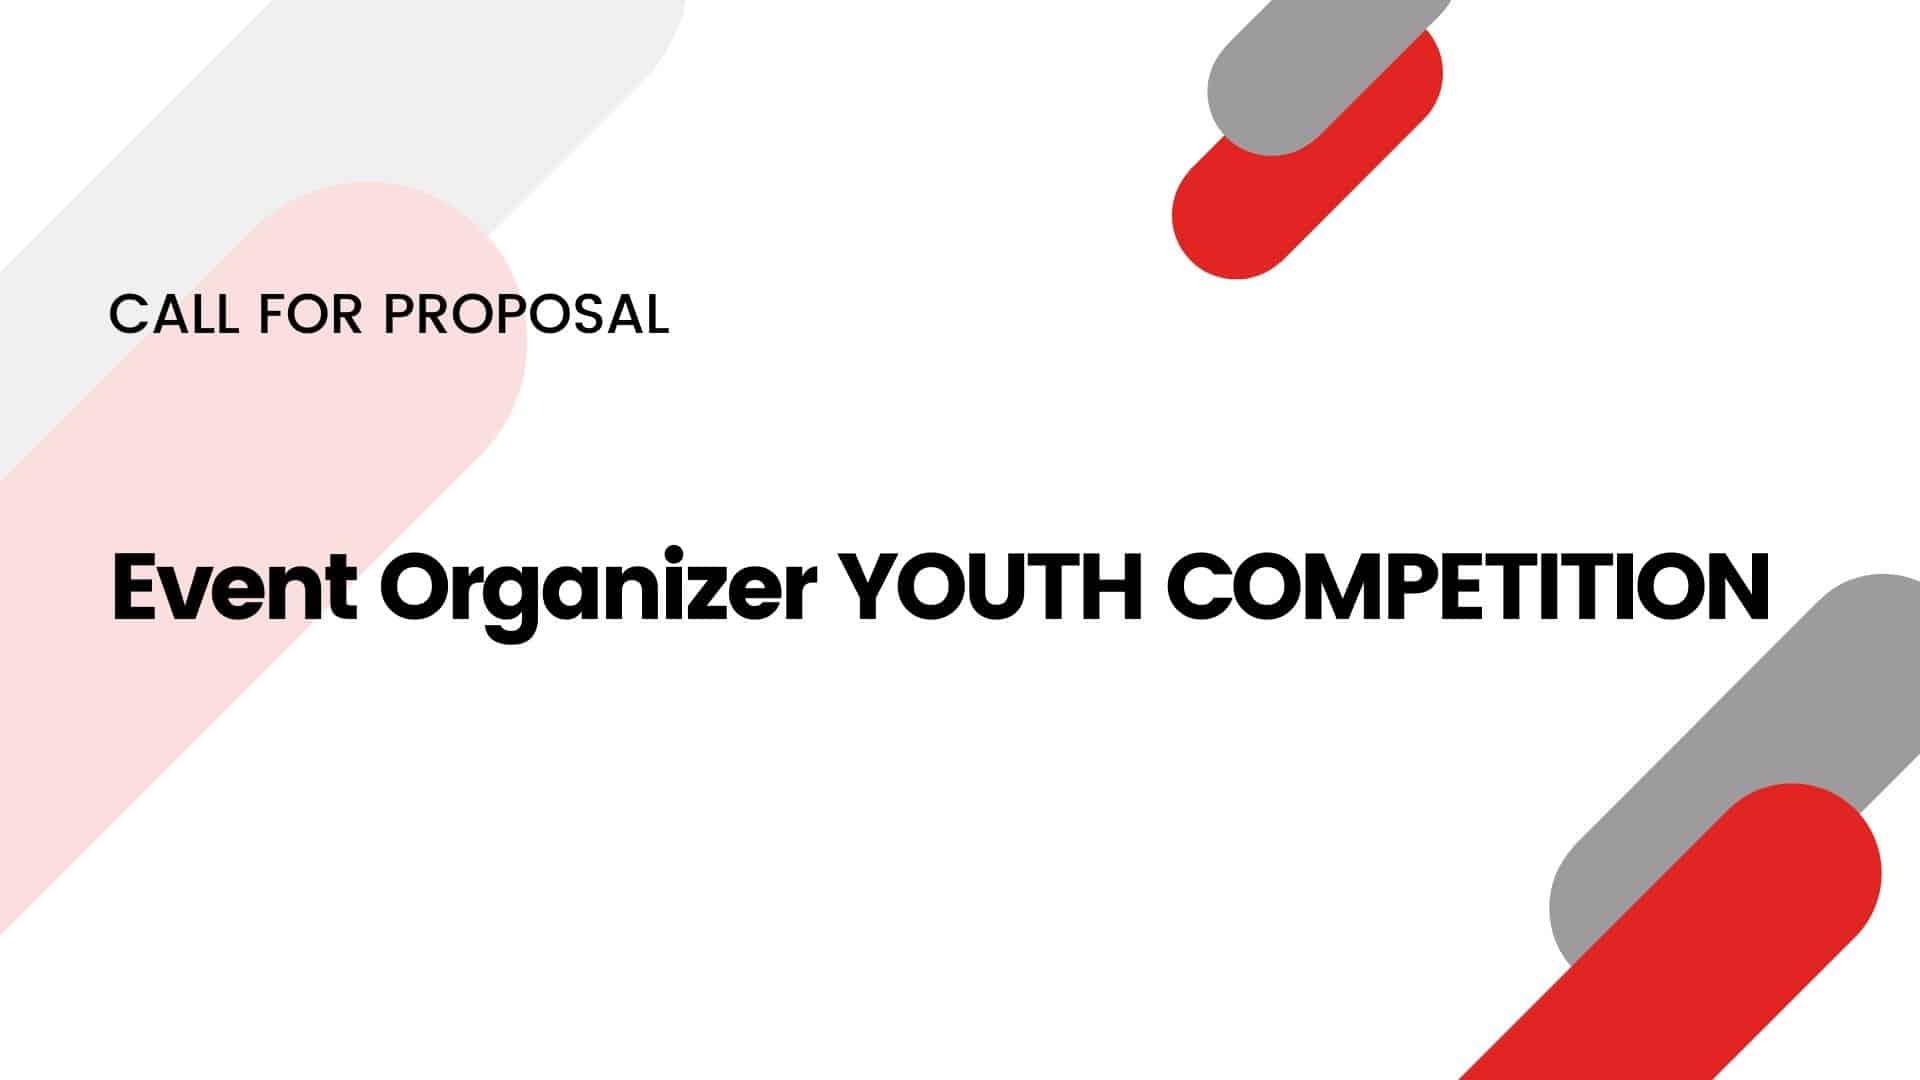 Call for Proposal: Event Organizer YOUTH COMPETITION